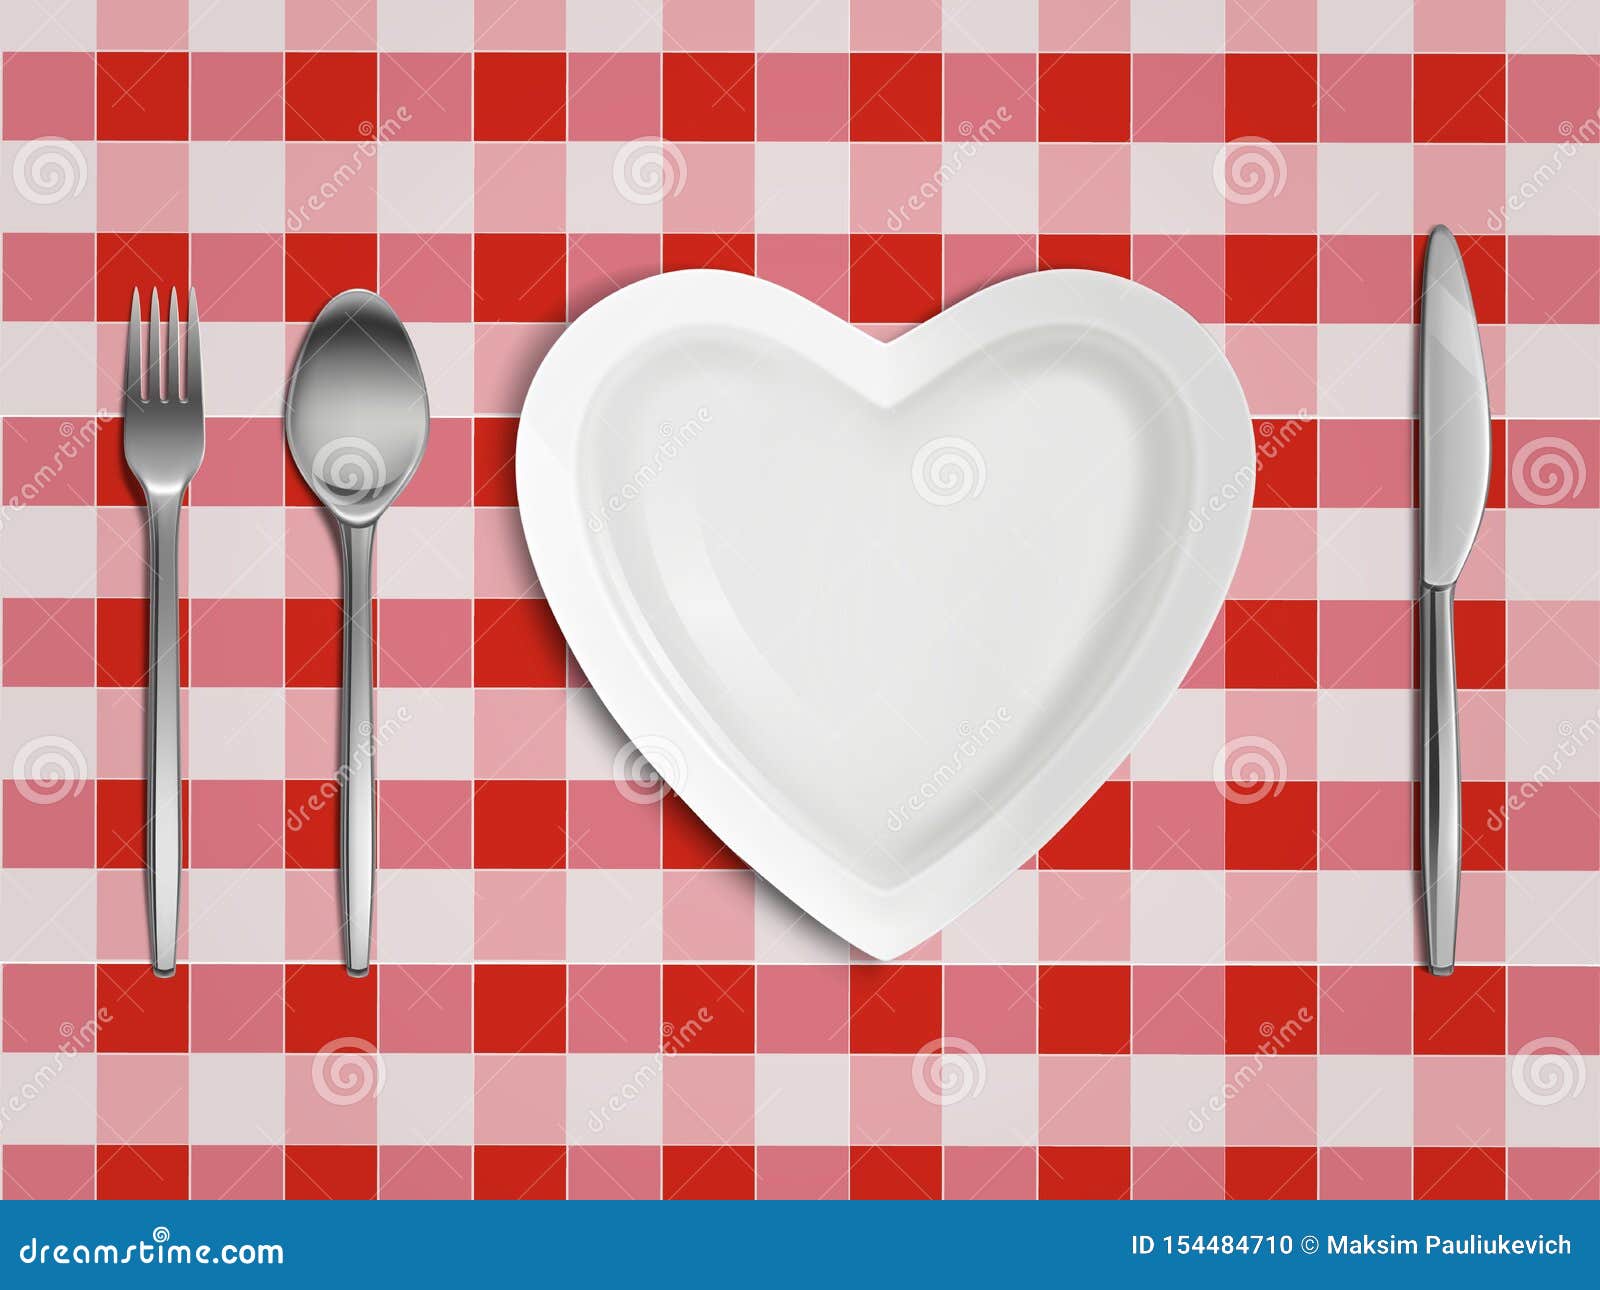 heart d plate, fork, spoon and knife top view